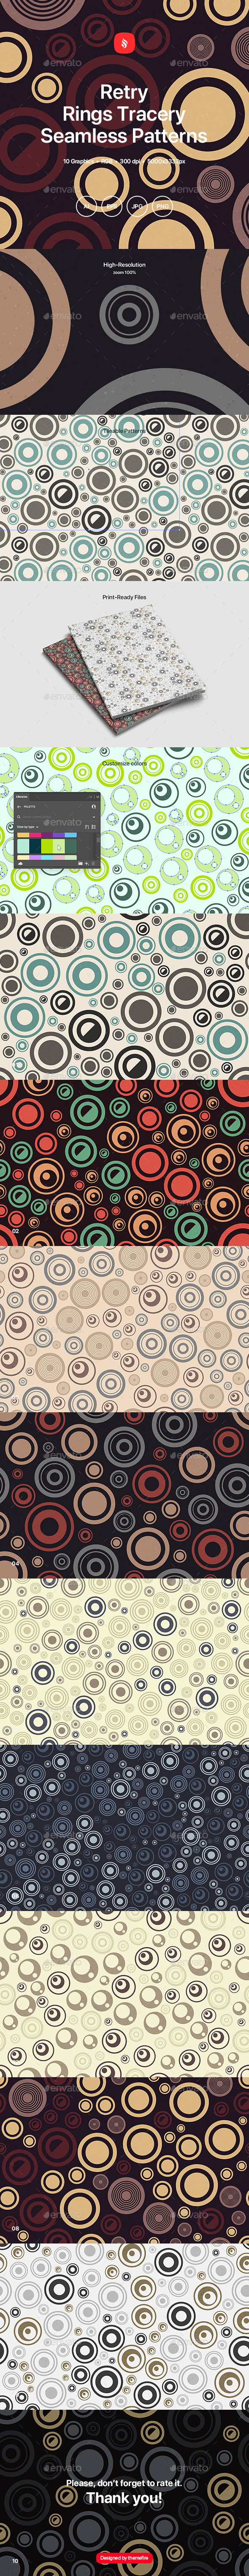 Retry - Rings Tracery Seamless Patterns